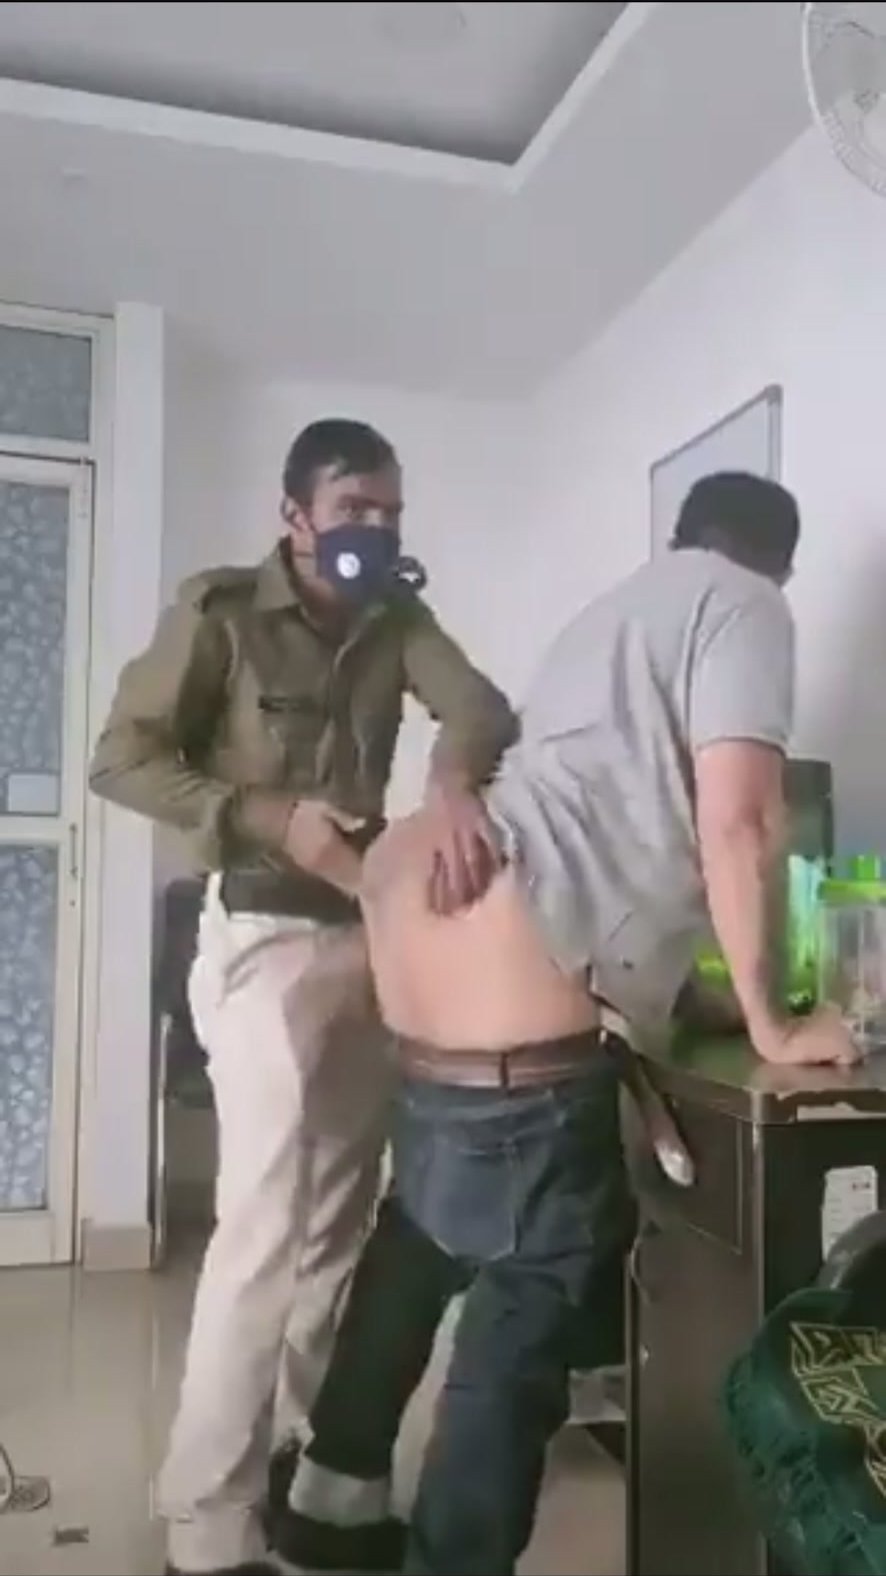 Indian Spanked Naked - Indian Men: indian officer smacks and gropes ass - ThisVid.com